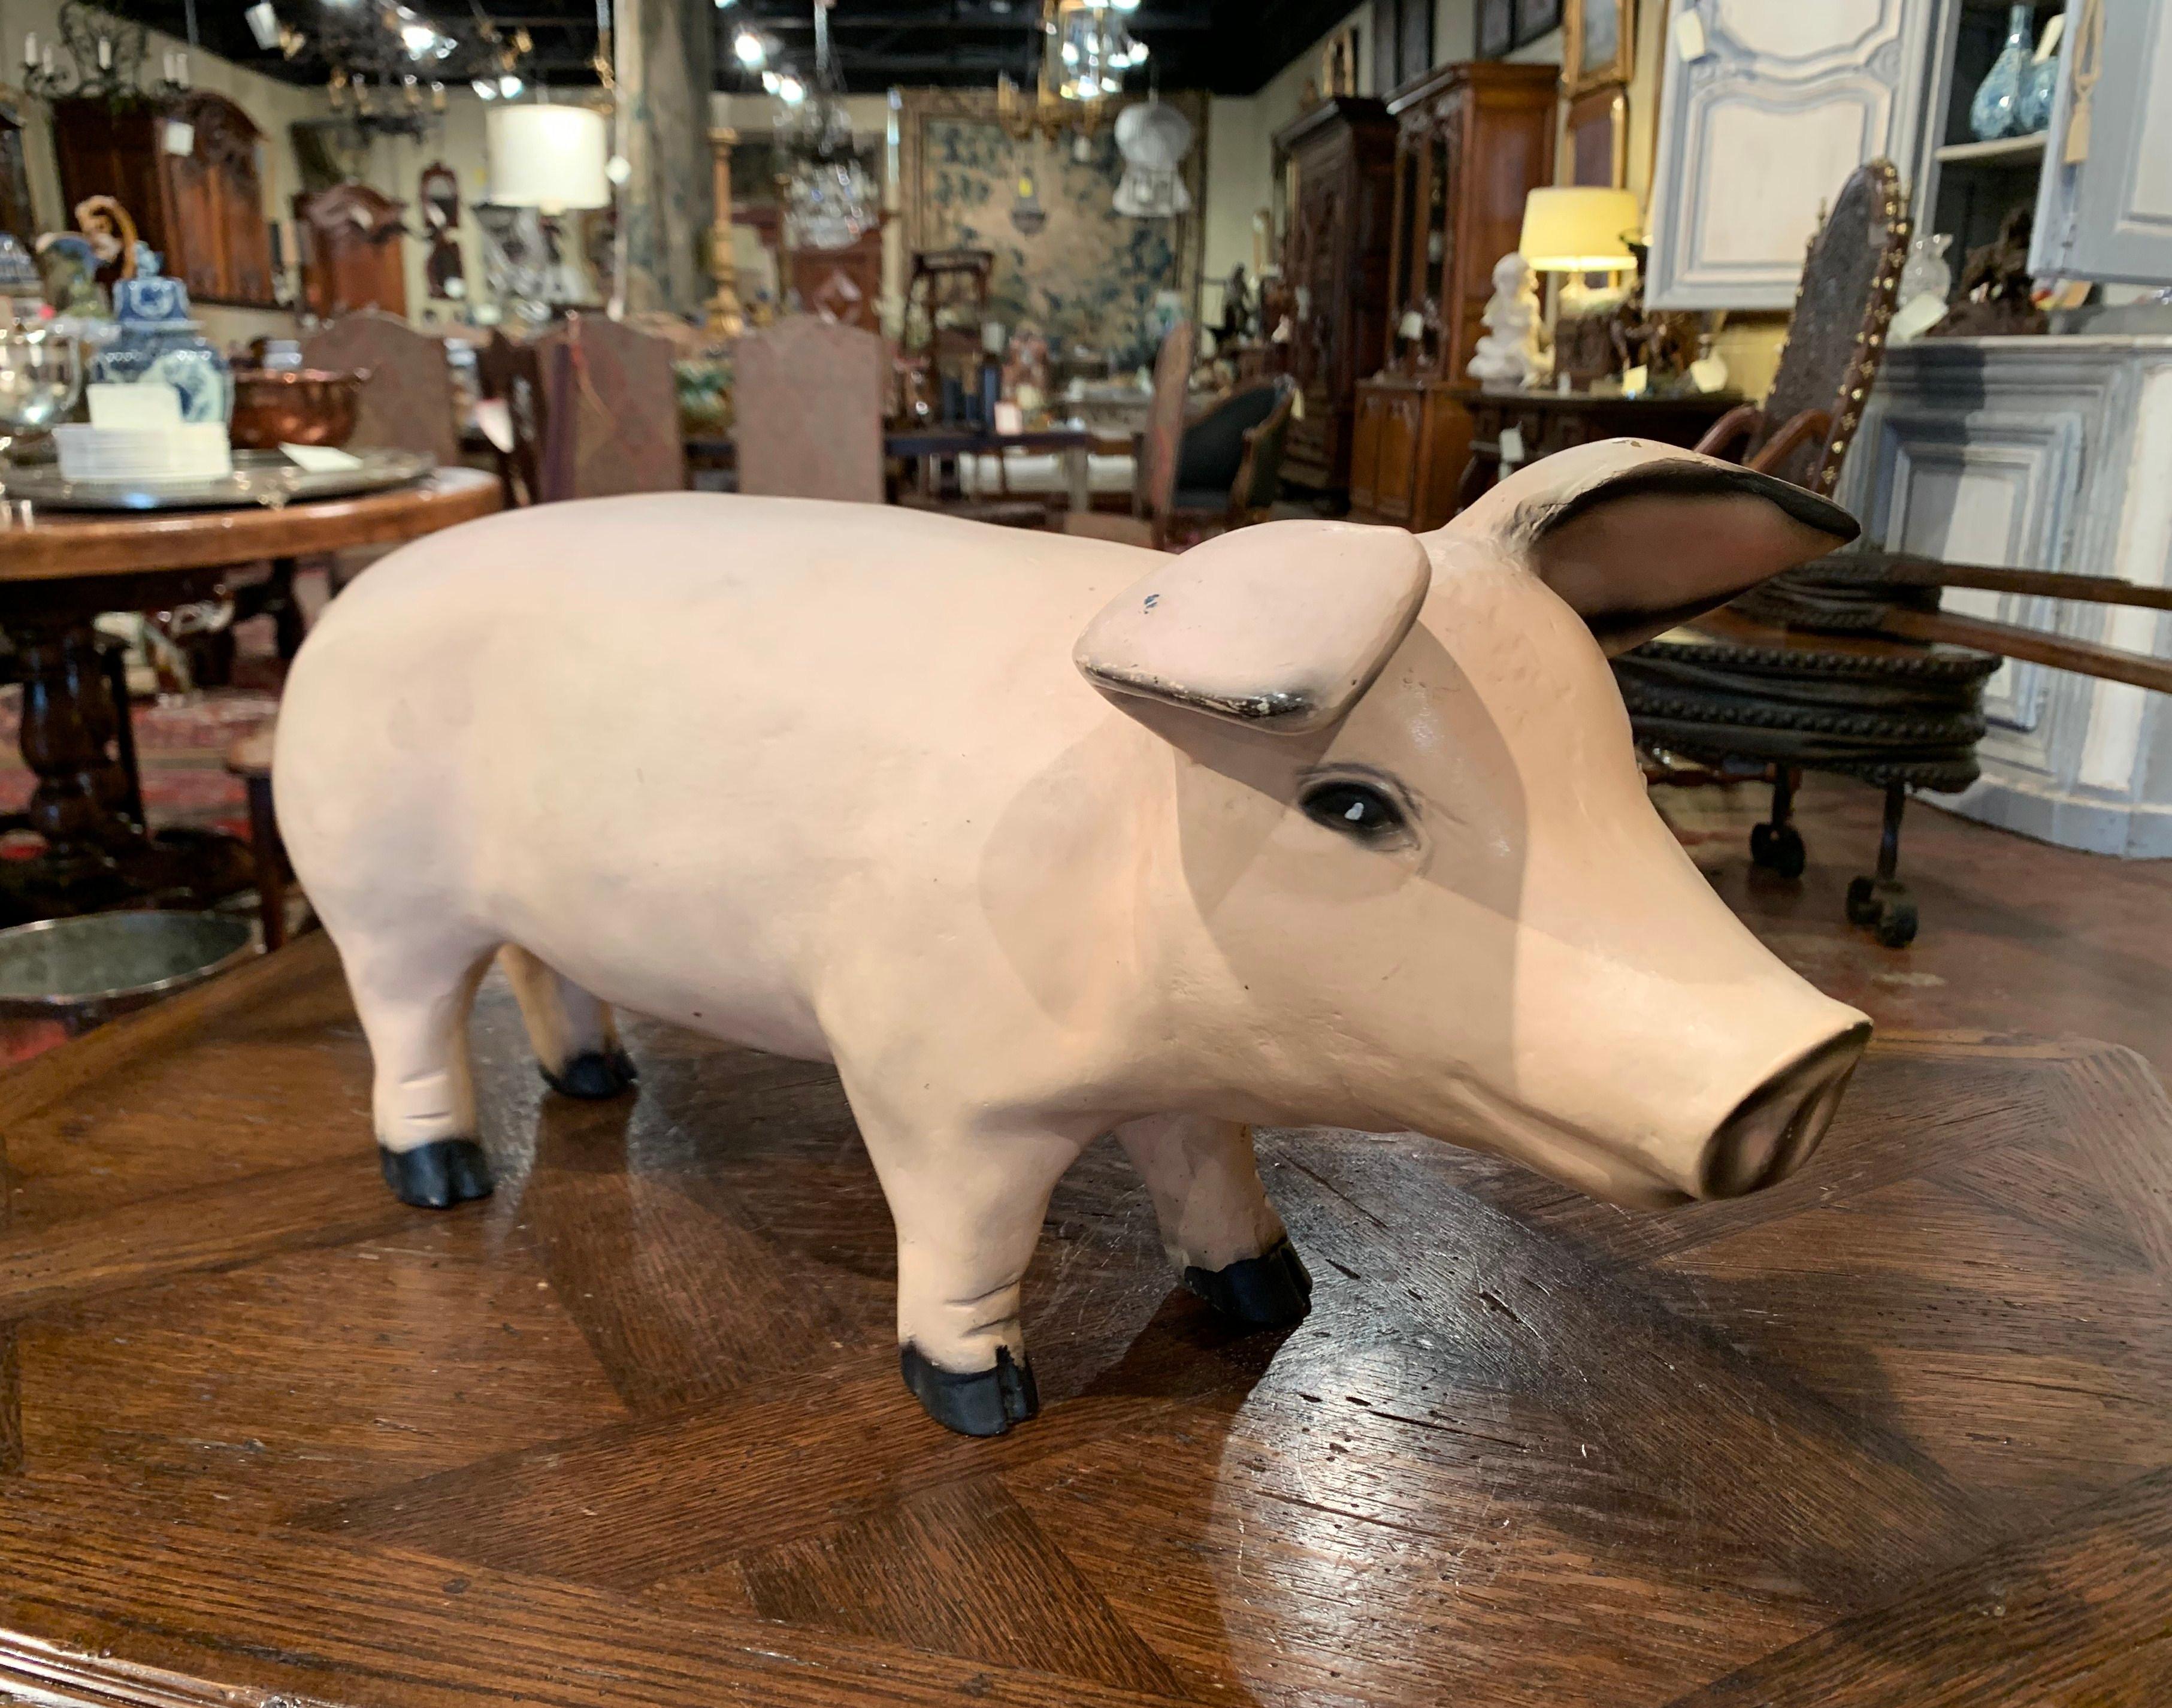 Decorate a kitchen counter or a shelf with this large vintage pig sculpture. Crafted in France circa 1960, the standing pig with cute facial and ear features, adorns a rich painted patinated finish in the pink palette embellished with black painted